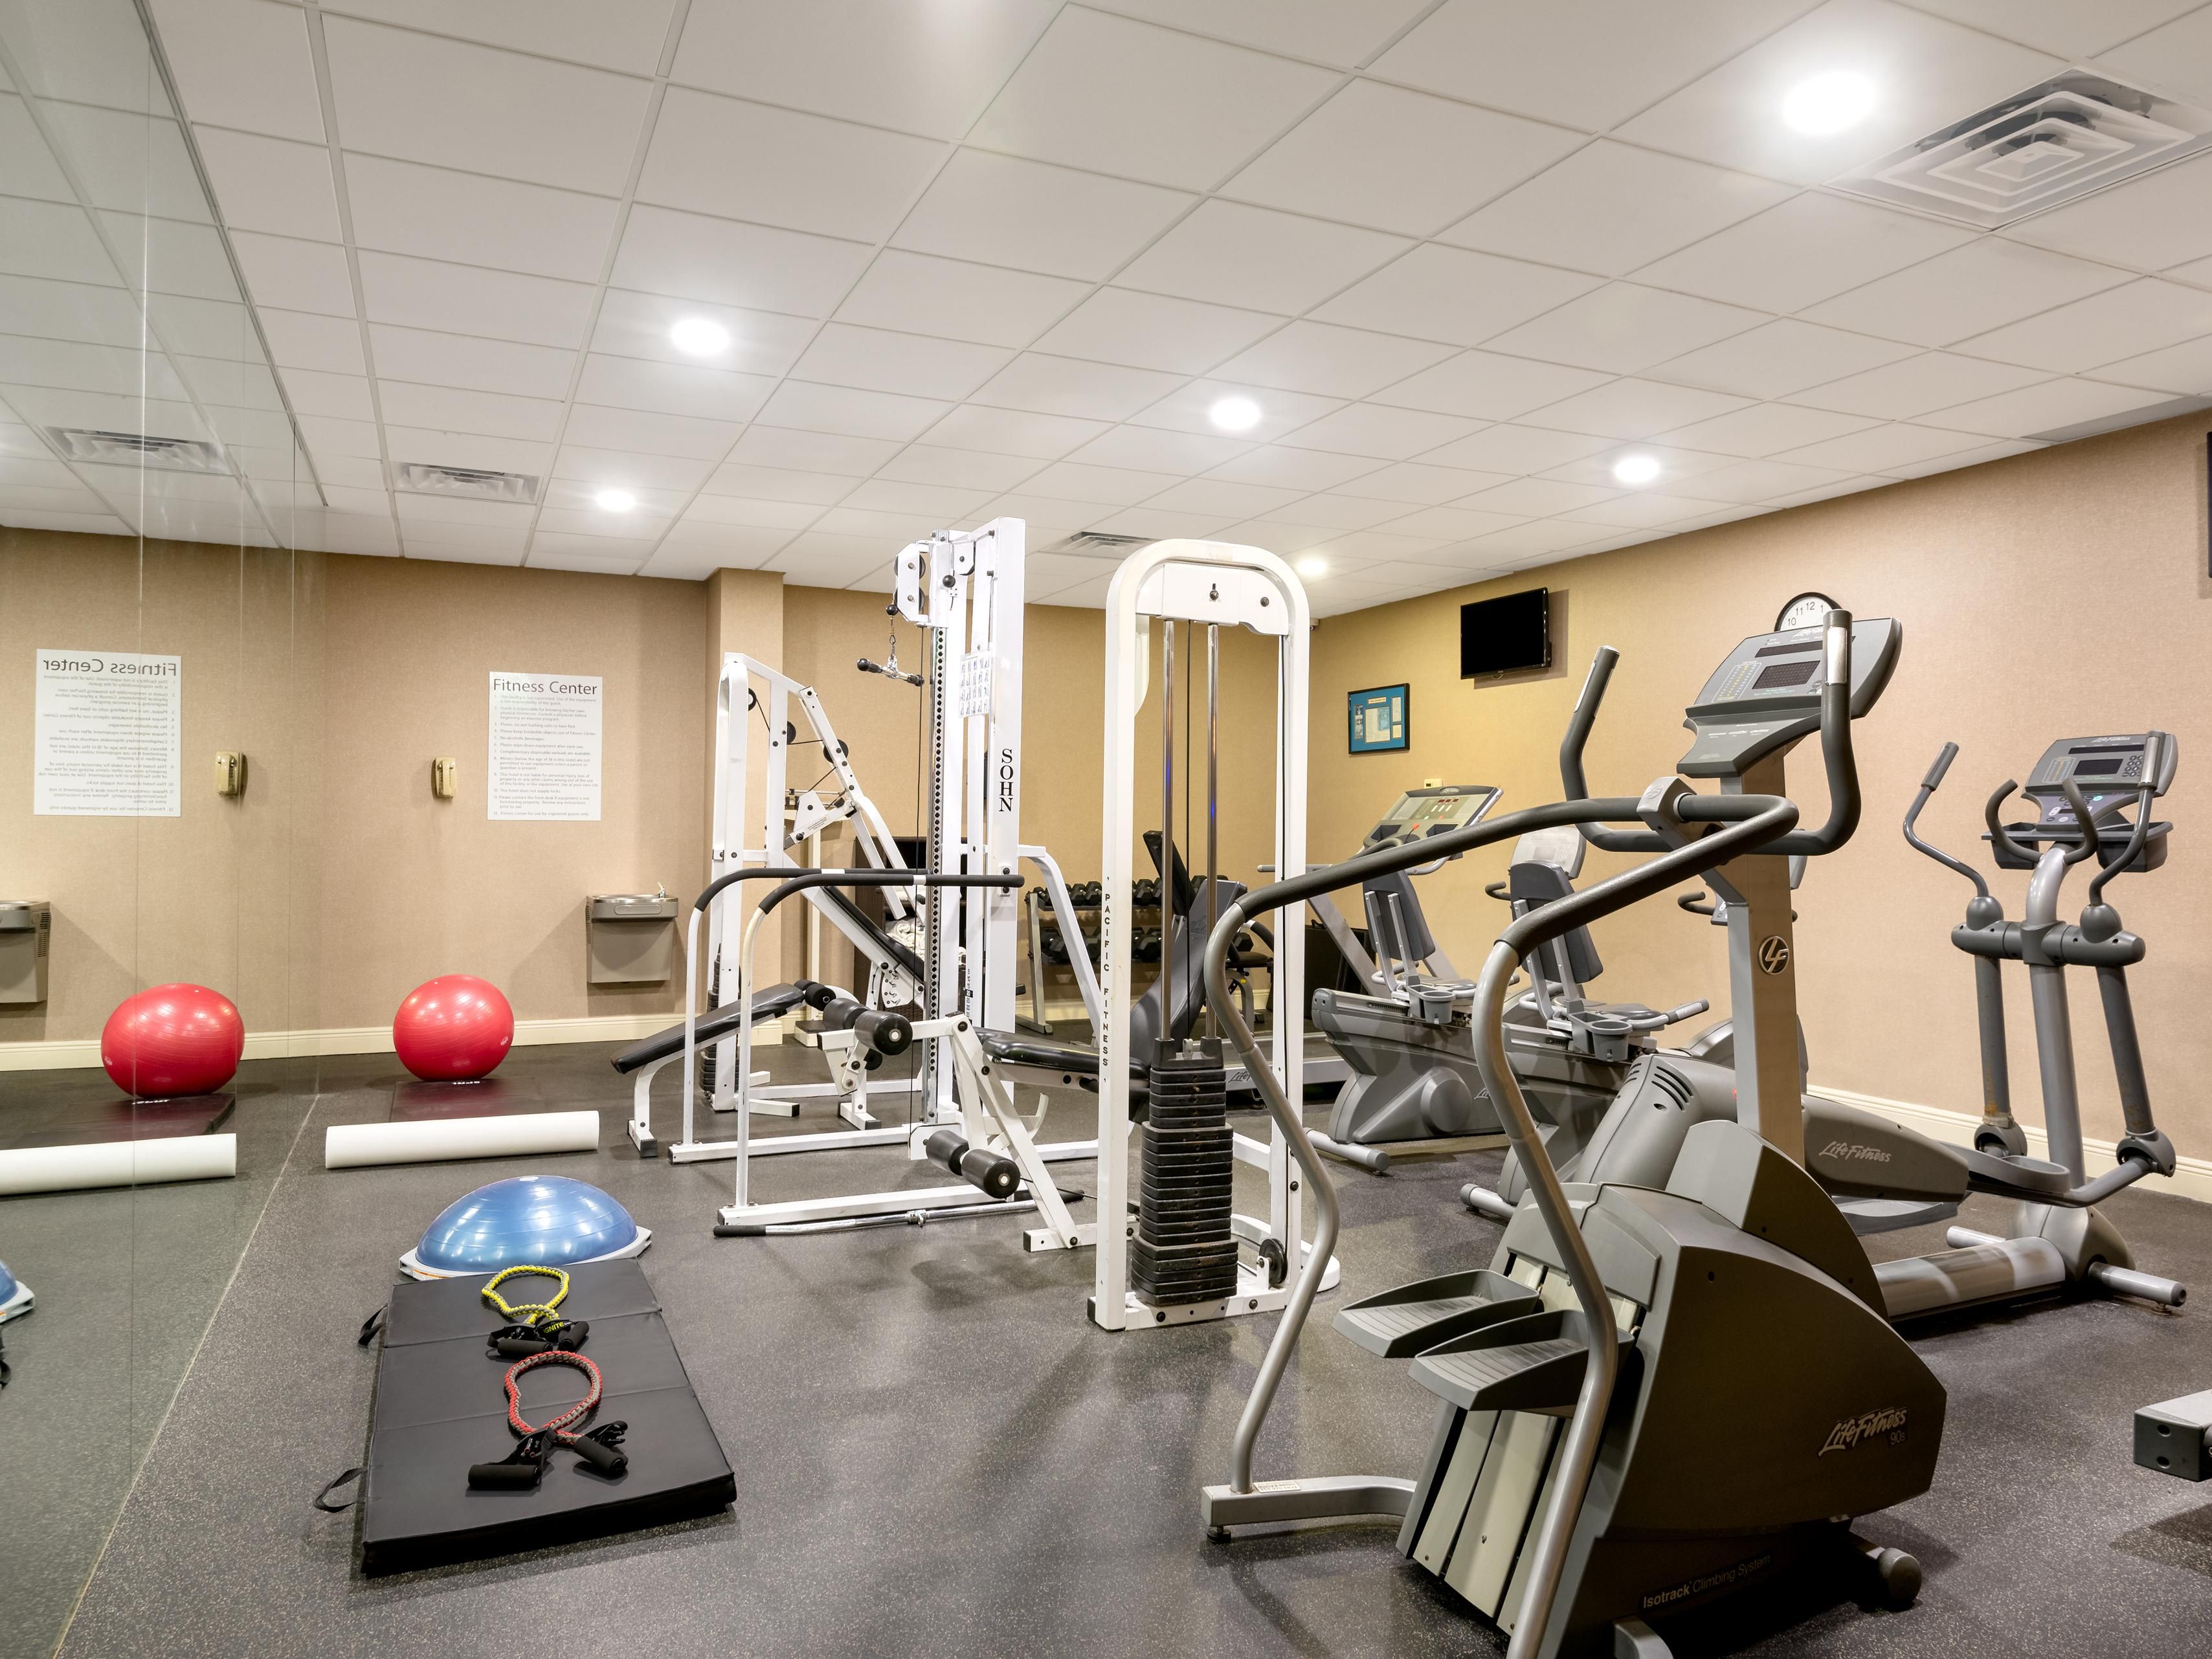 Here for business or on vacation, take advantage of our state-of-the-art fitness center. Our gym comes with 5-star amenities that are sure to make you feel great. We offer a wide variety of top-notch gym equipment for those who want a full body workout and need to get in, get out and get on with their day. 